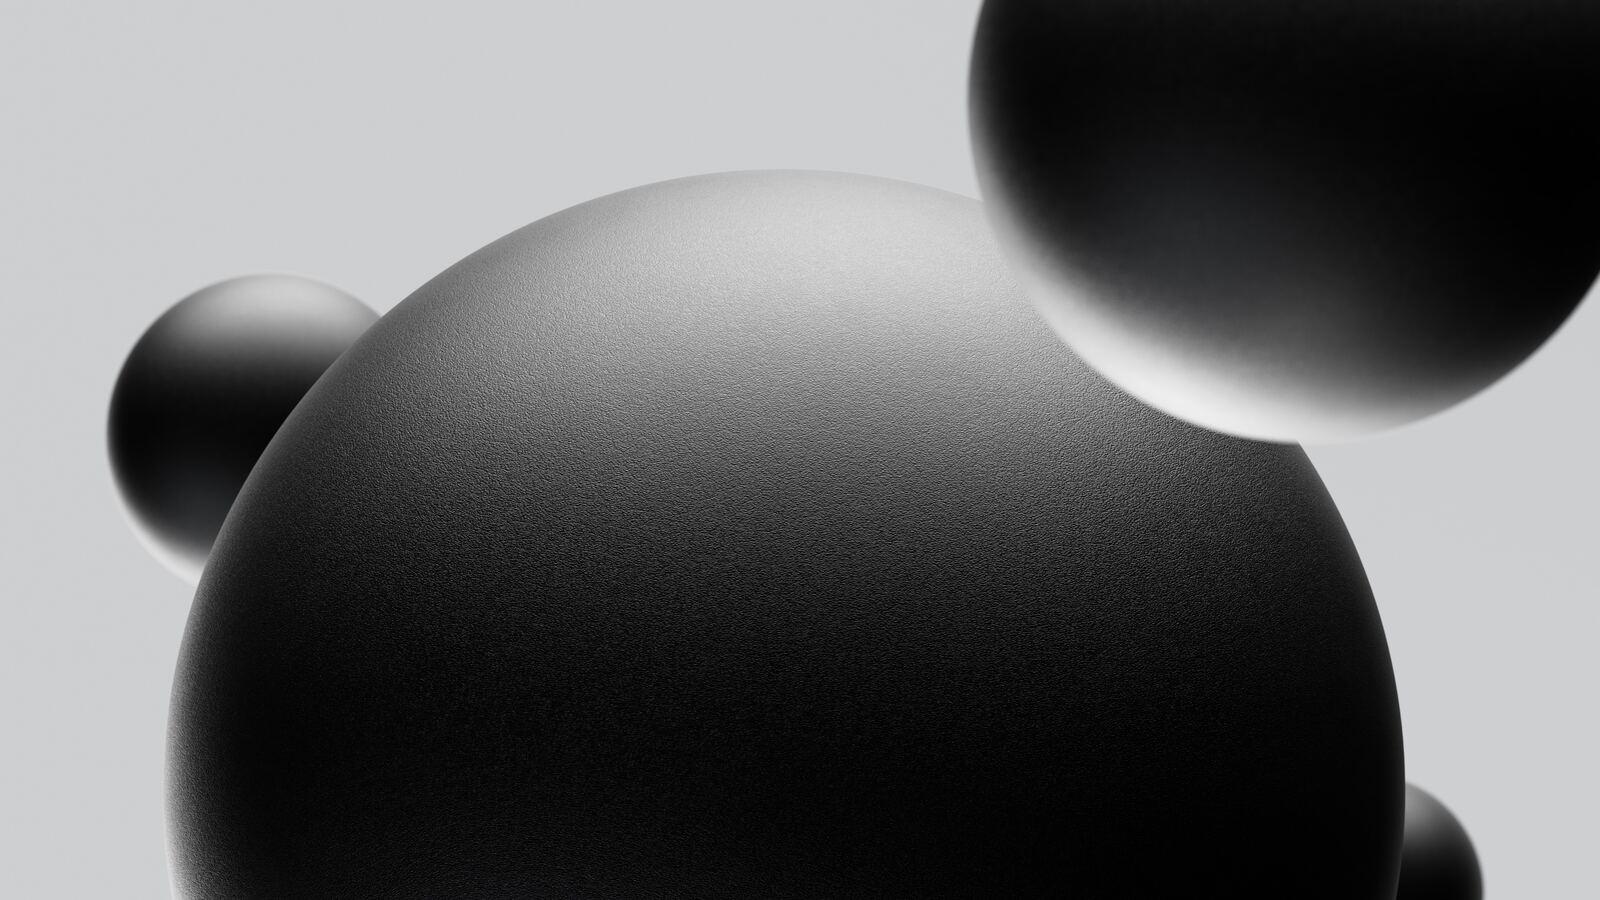 Abstract Spheres in Black and White